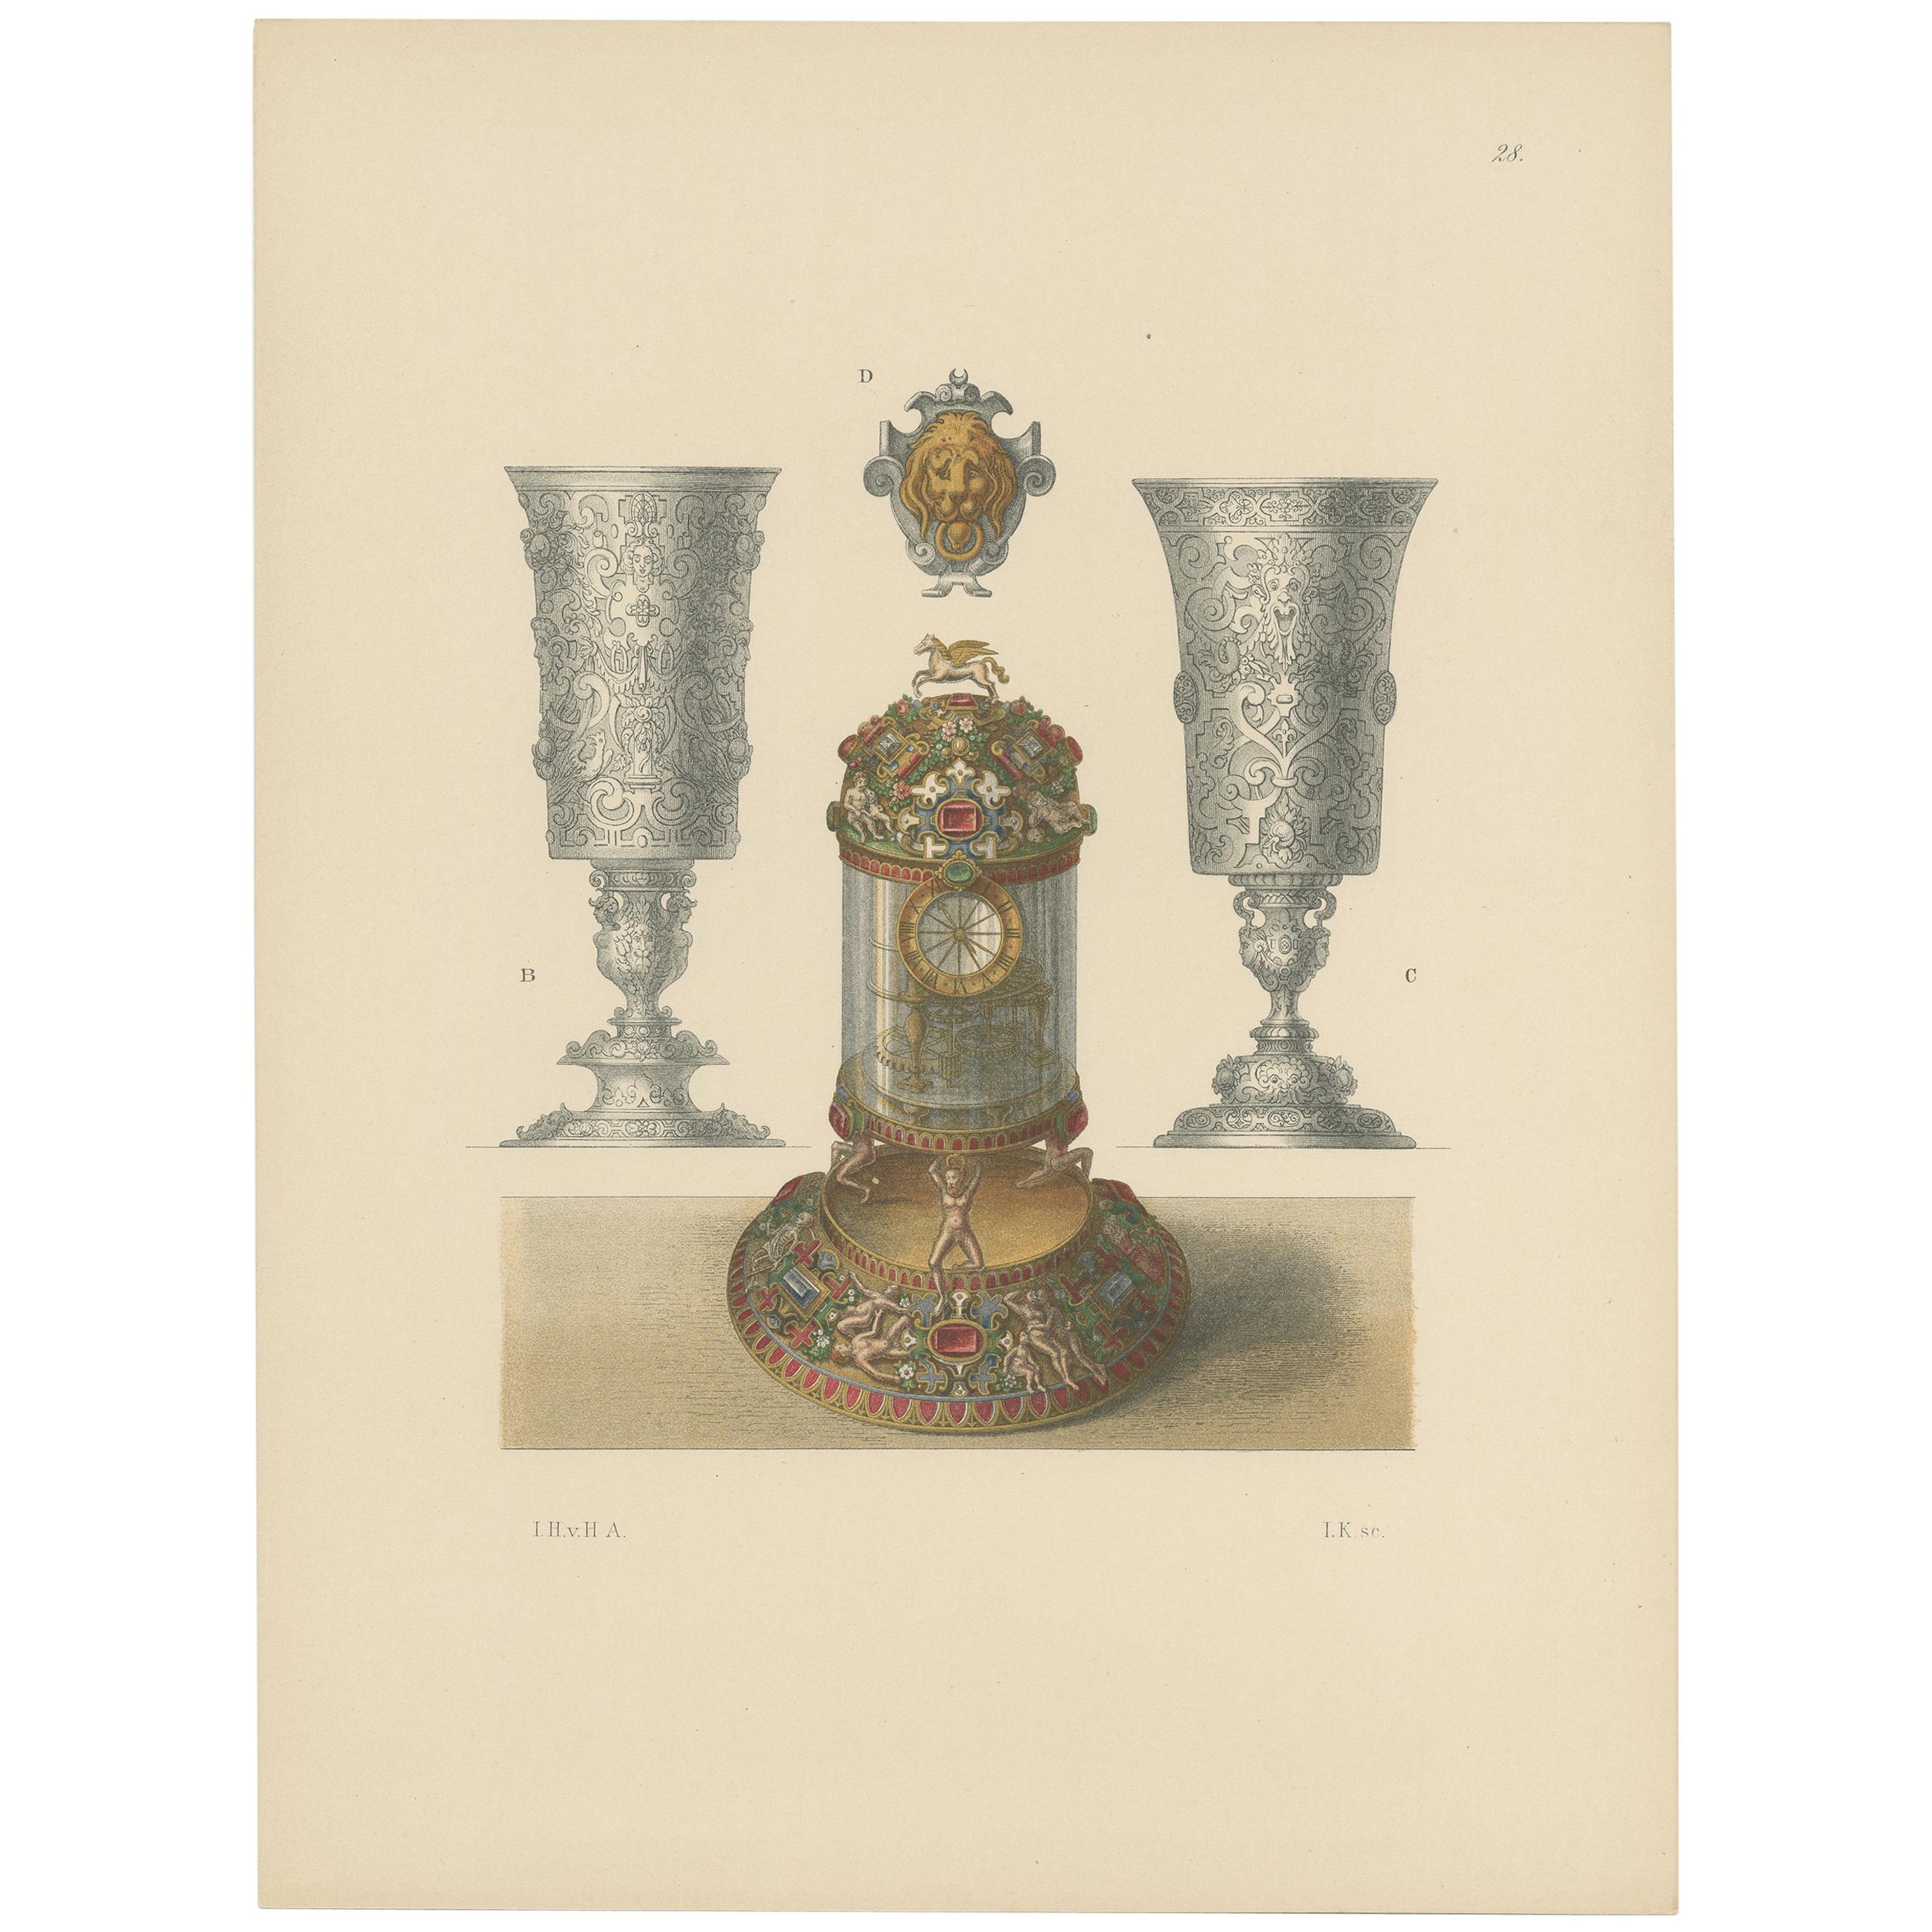 Antique Print of a Clock and Chalices by Hefner-Alteneck, '1890' For Sale